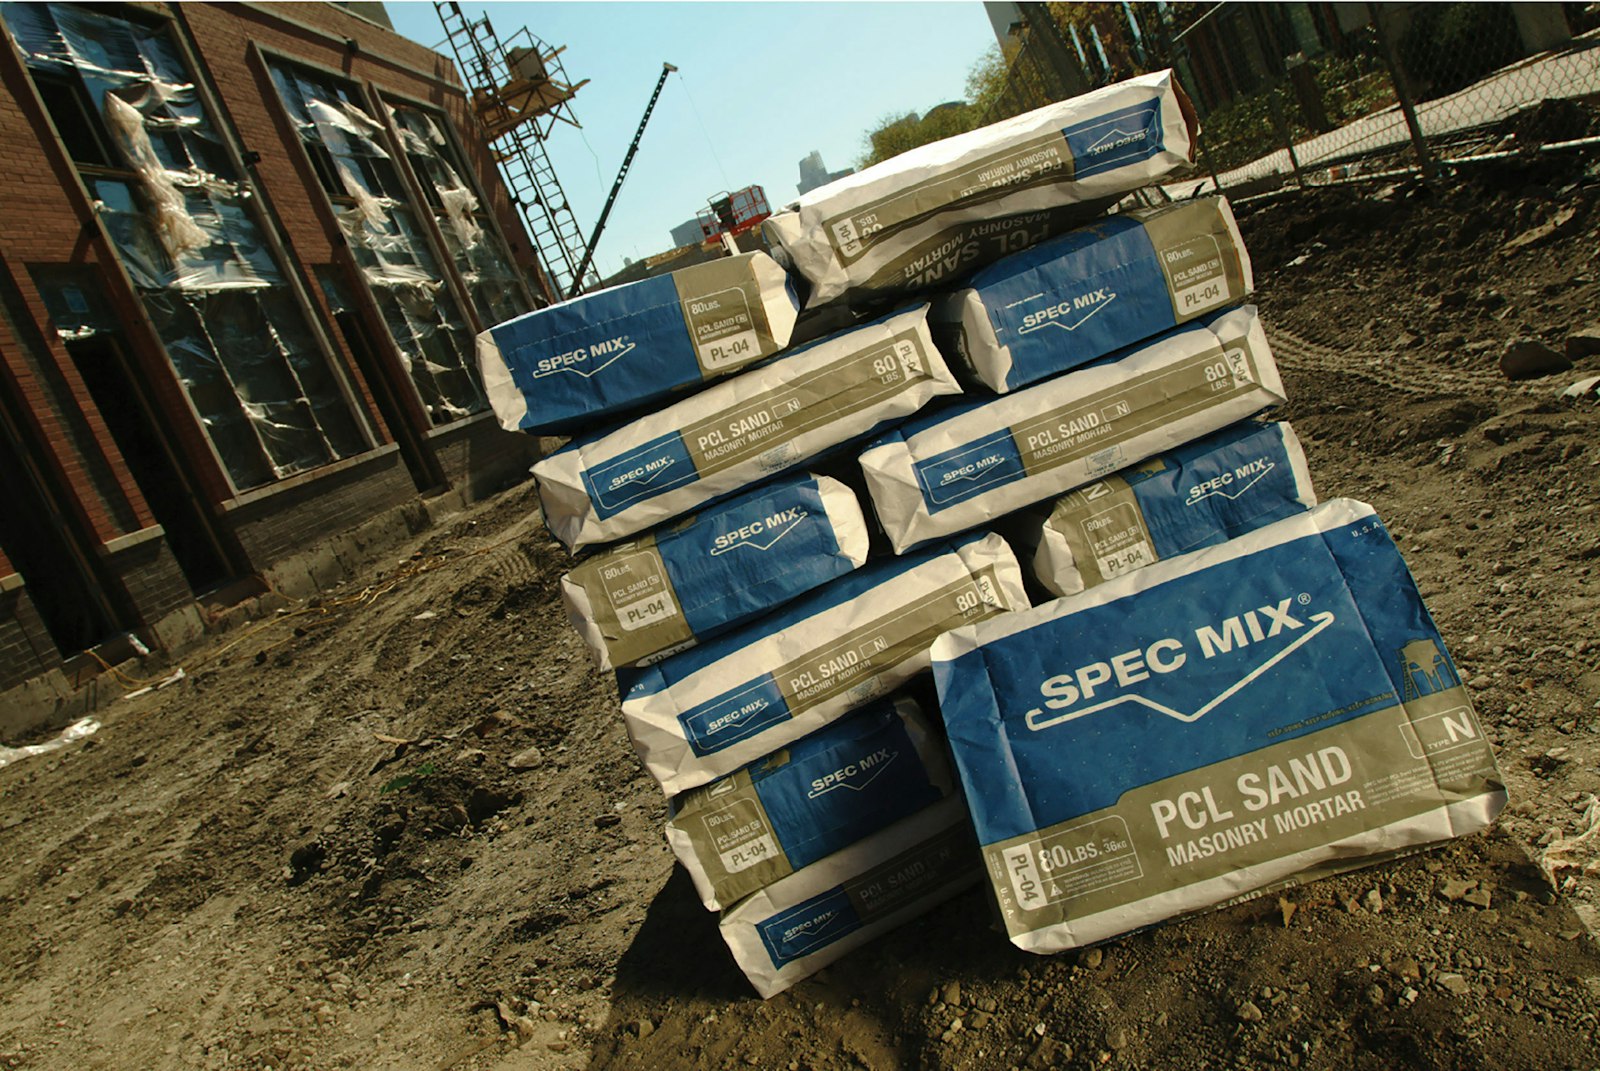 Spec Mix packaging and logo design on concrete product bags stacked in middle of construction.